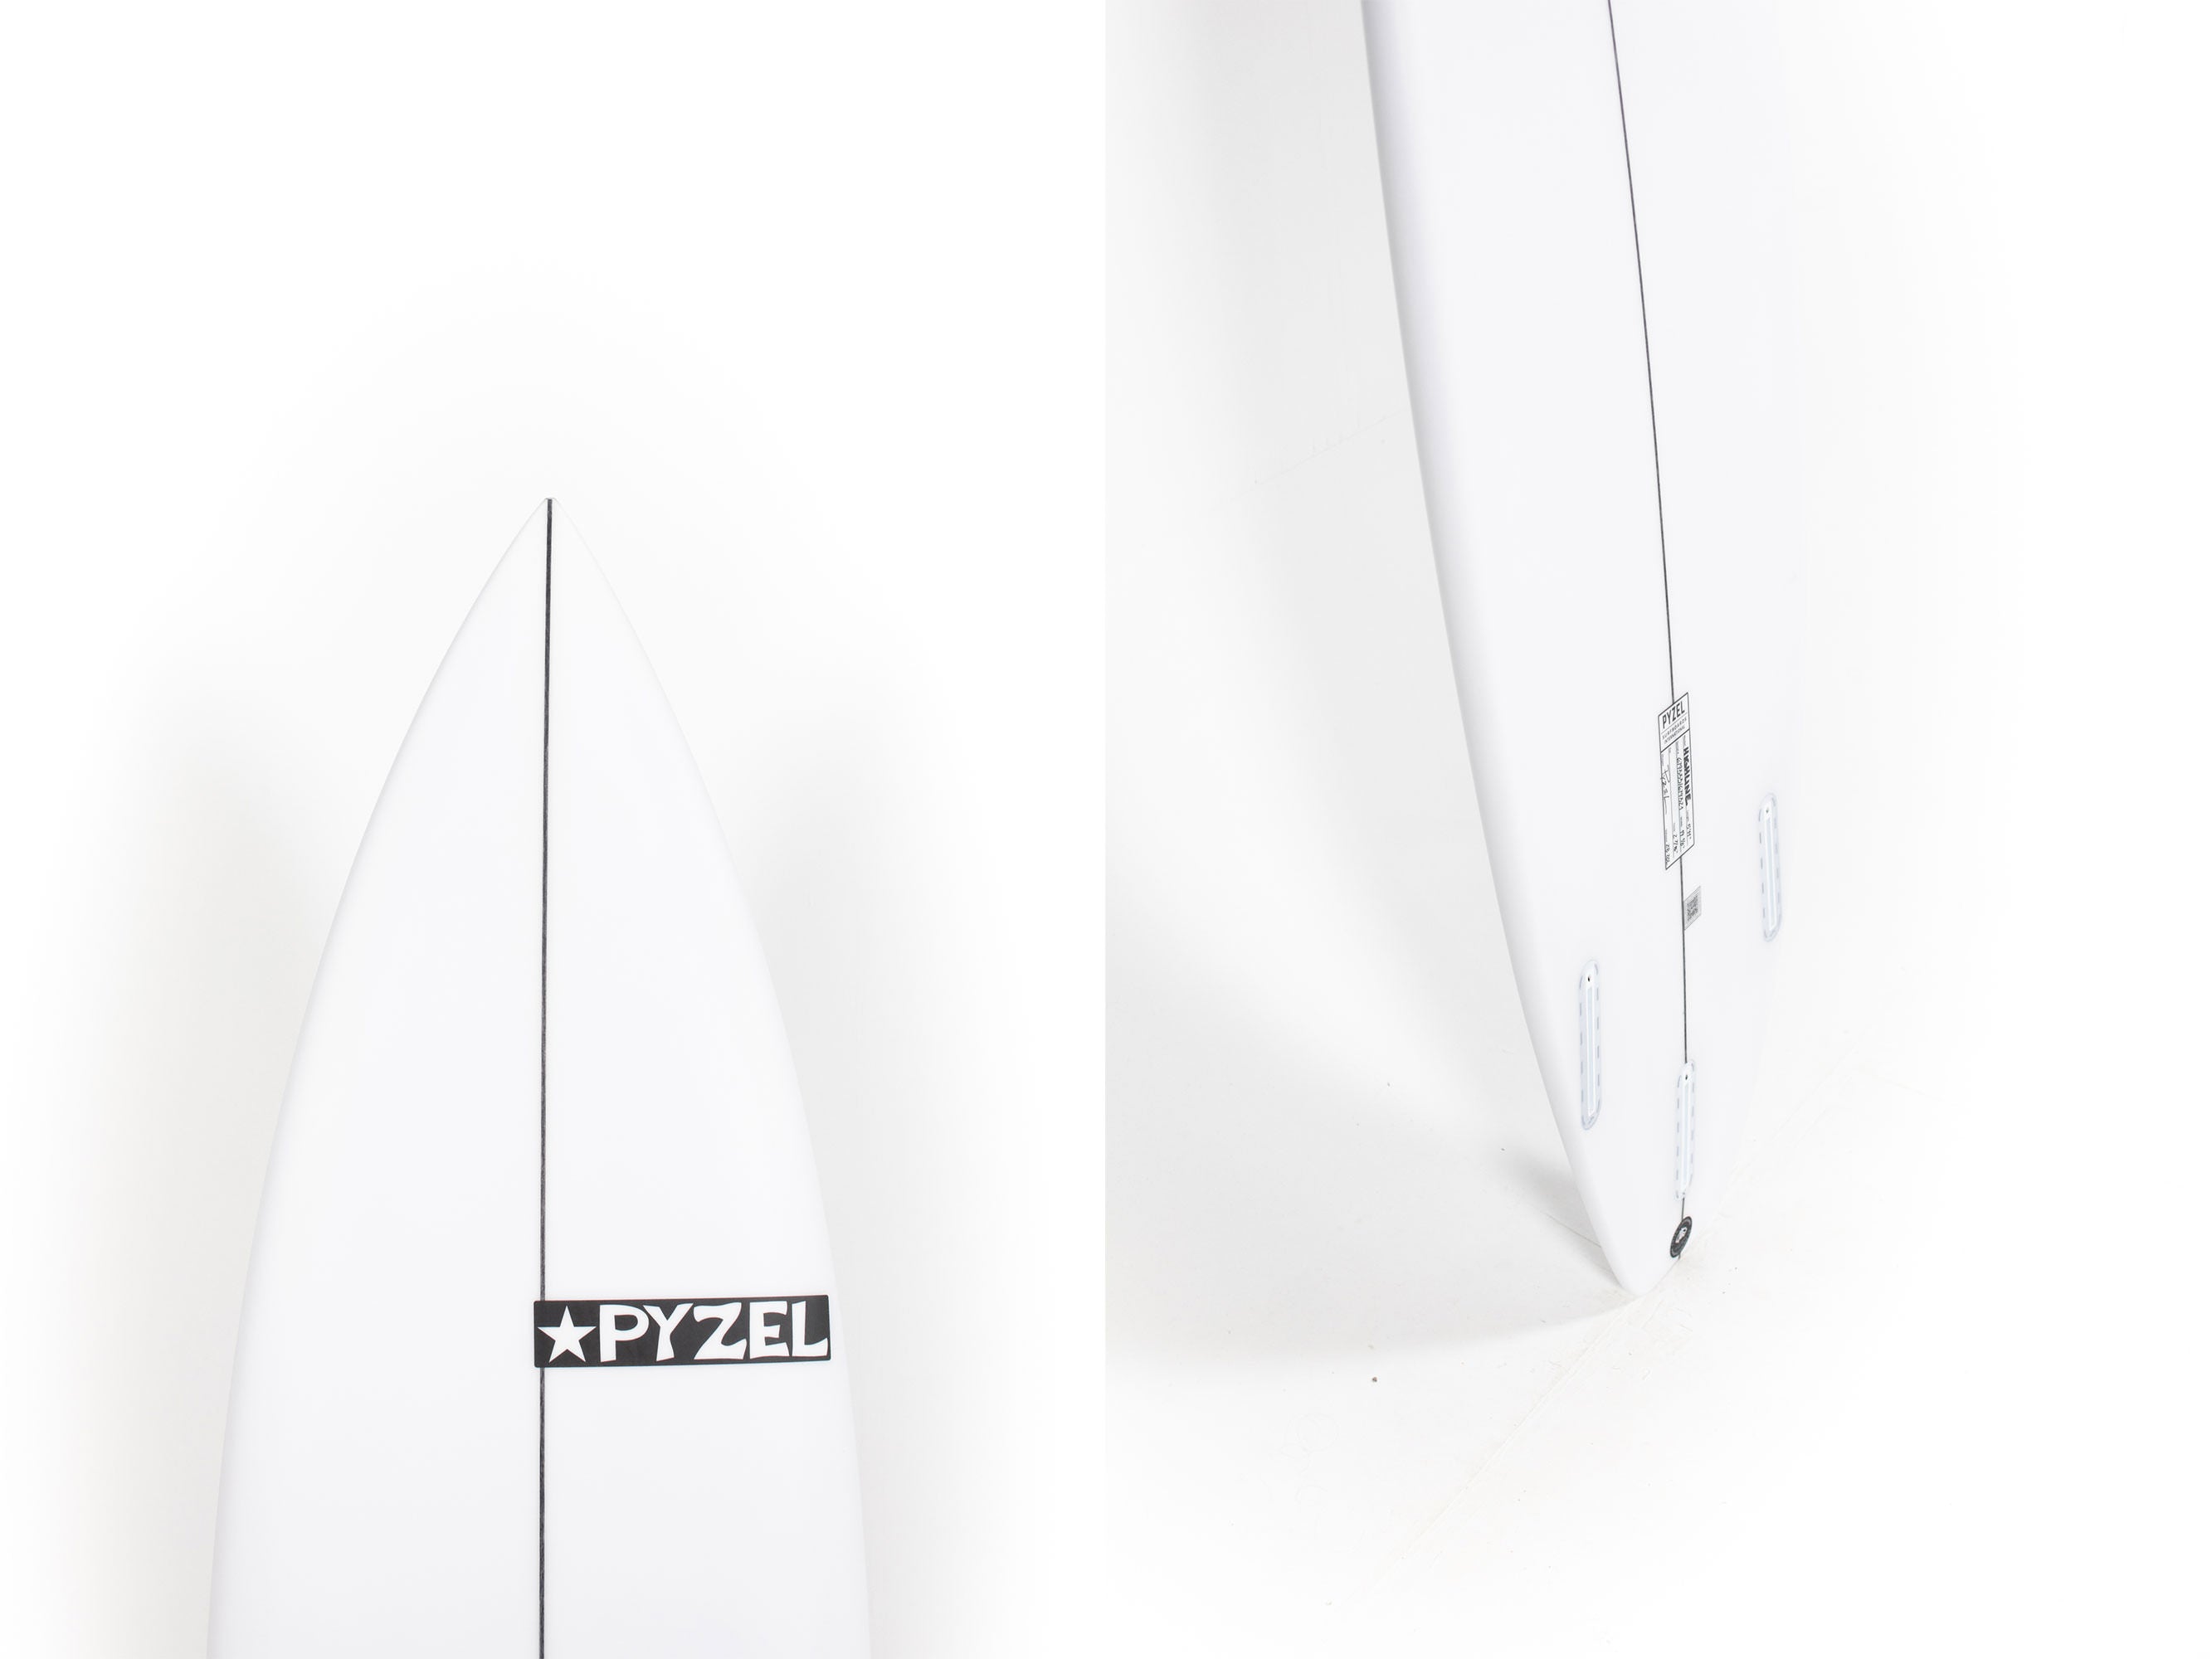 Pyzel Surfboards - HIGH LINE - 5'11" x 19 1/8 x 2 7/16 x 28,20L - Ref: 679321